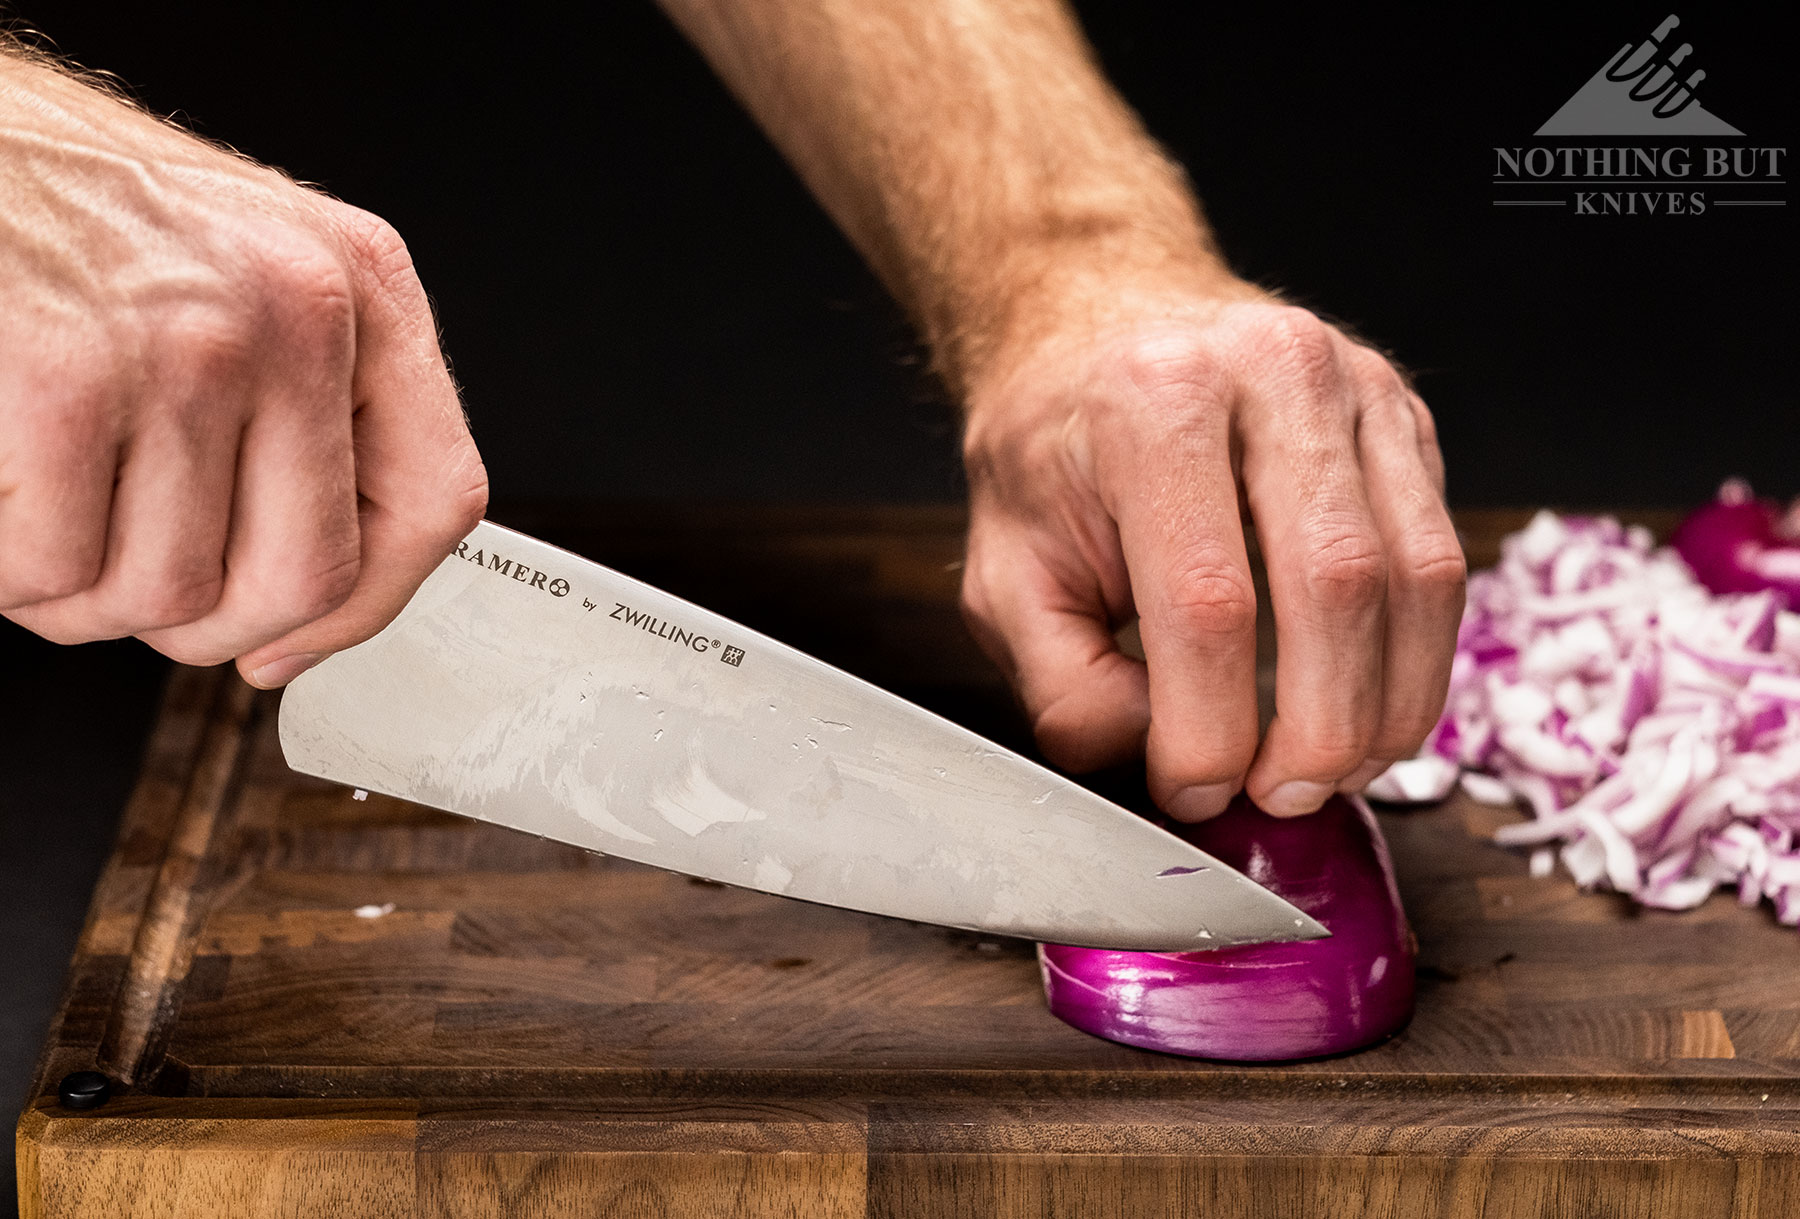 https://www.nothingbutknives.com/wp-content/uploads/2022/03/Dicing-With-The-Kramer-By-Zwilling-Chef-Knife.jpg